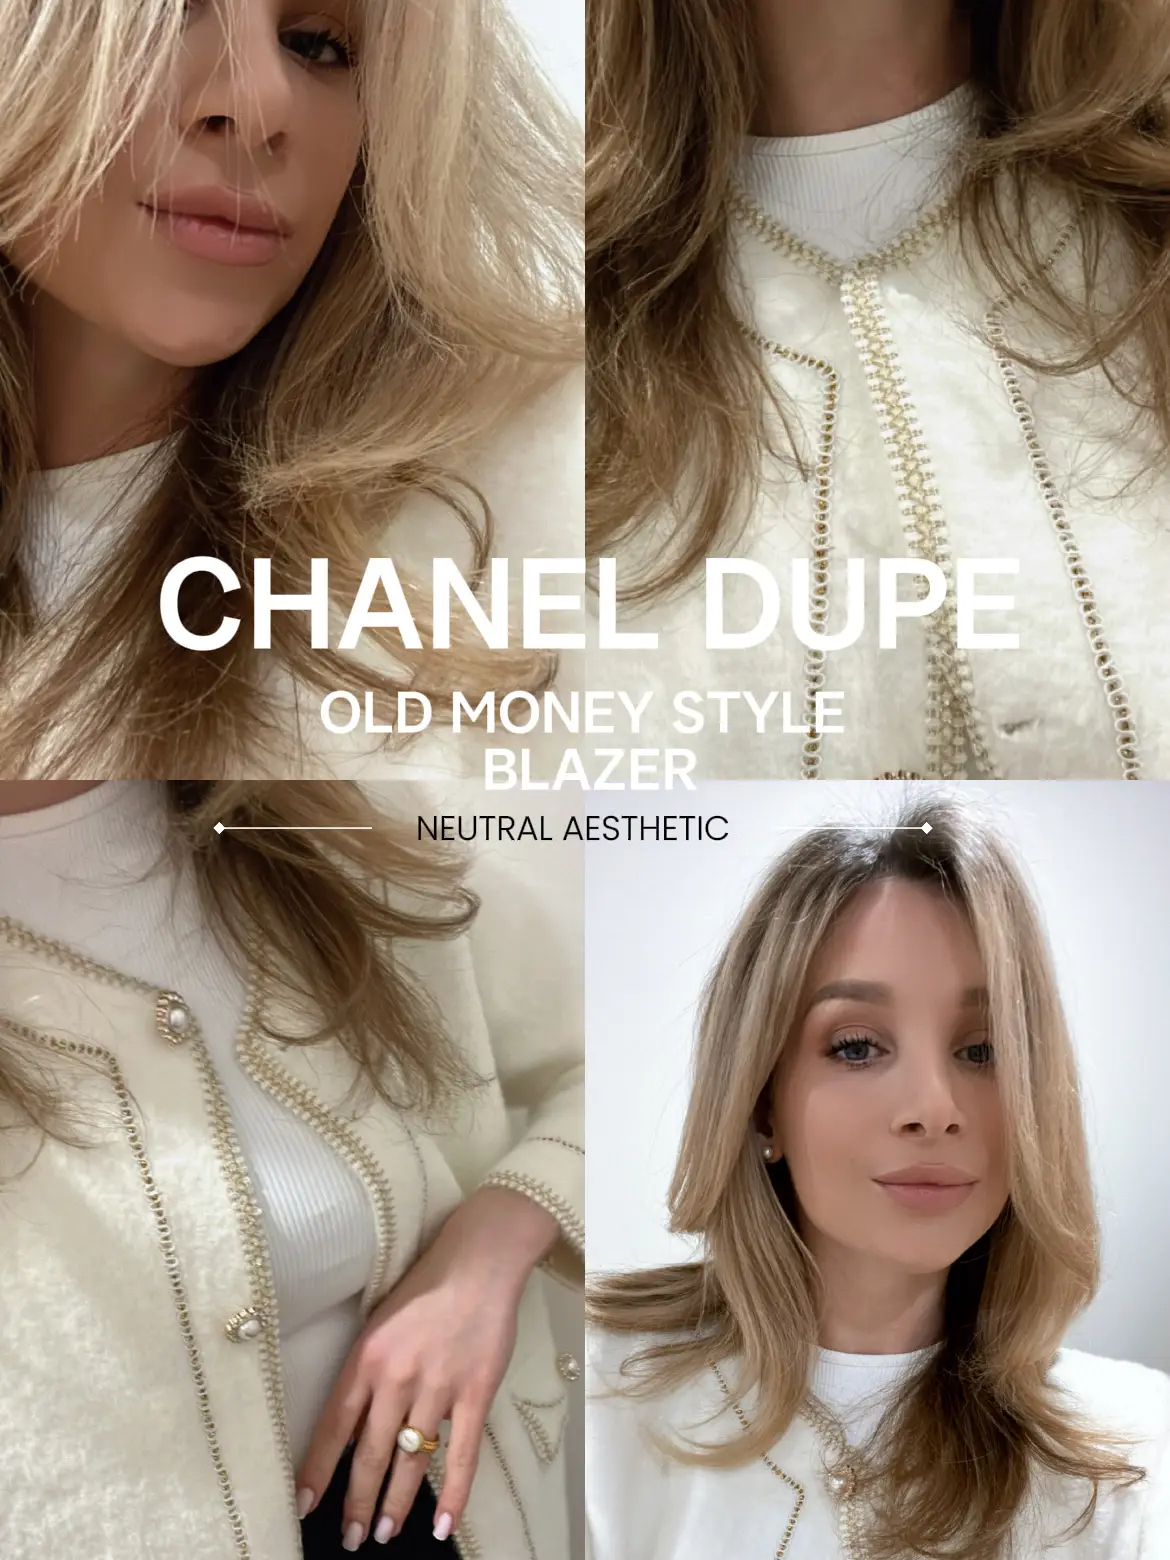 Chanel dupe jacket for less than 50$!, Gallery posted by Yuliia S.